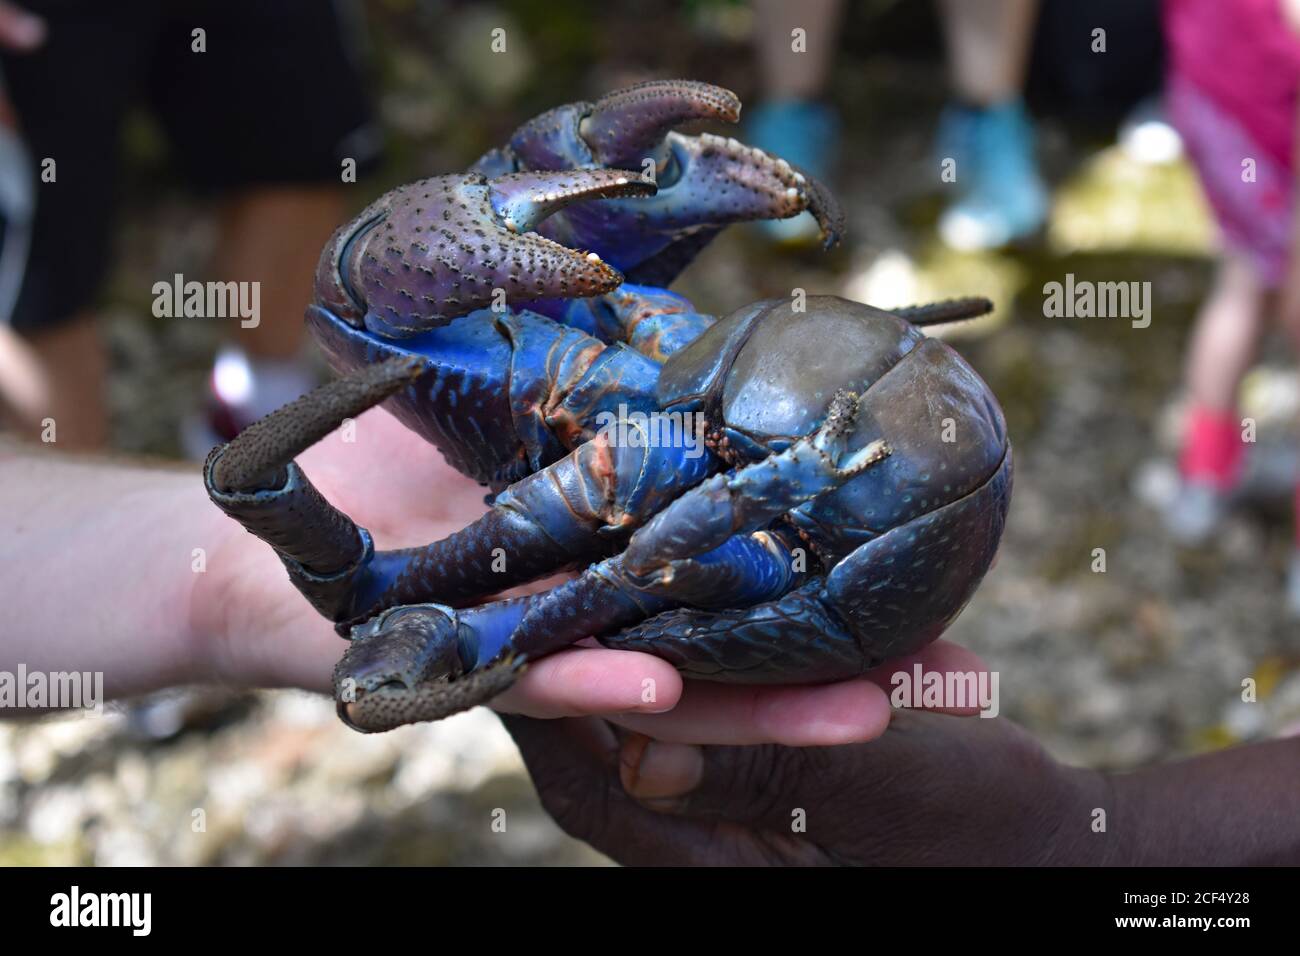 A bright blue Coconut Crab (Birgus latro) being held by two men of different race.  Tourists are overlooking the crab in the background.  Lifou Island. Stock Photo